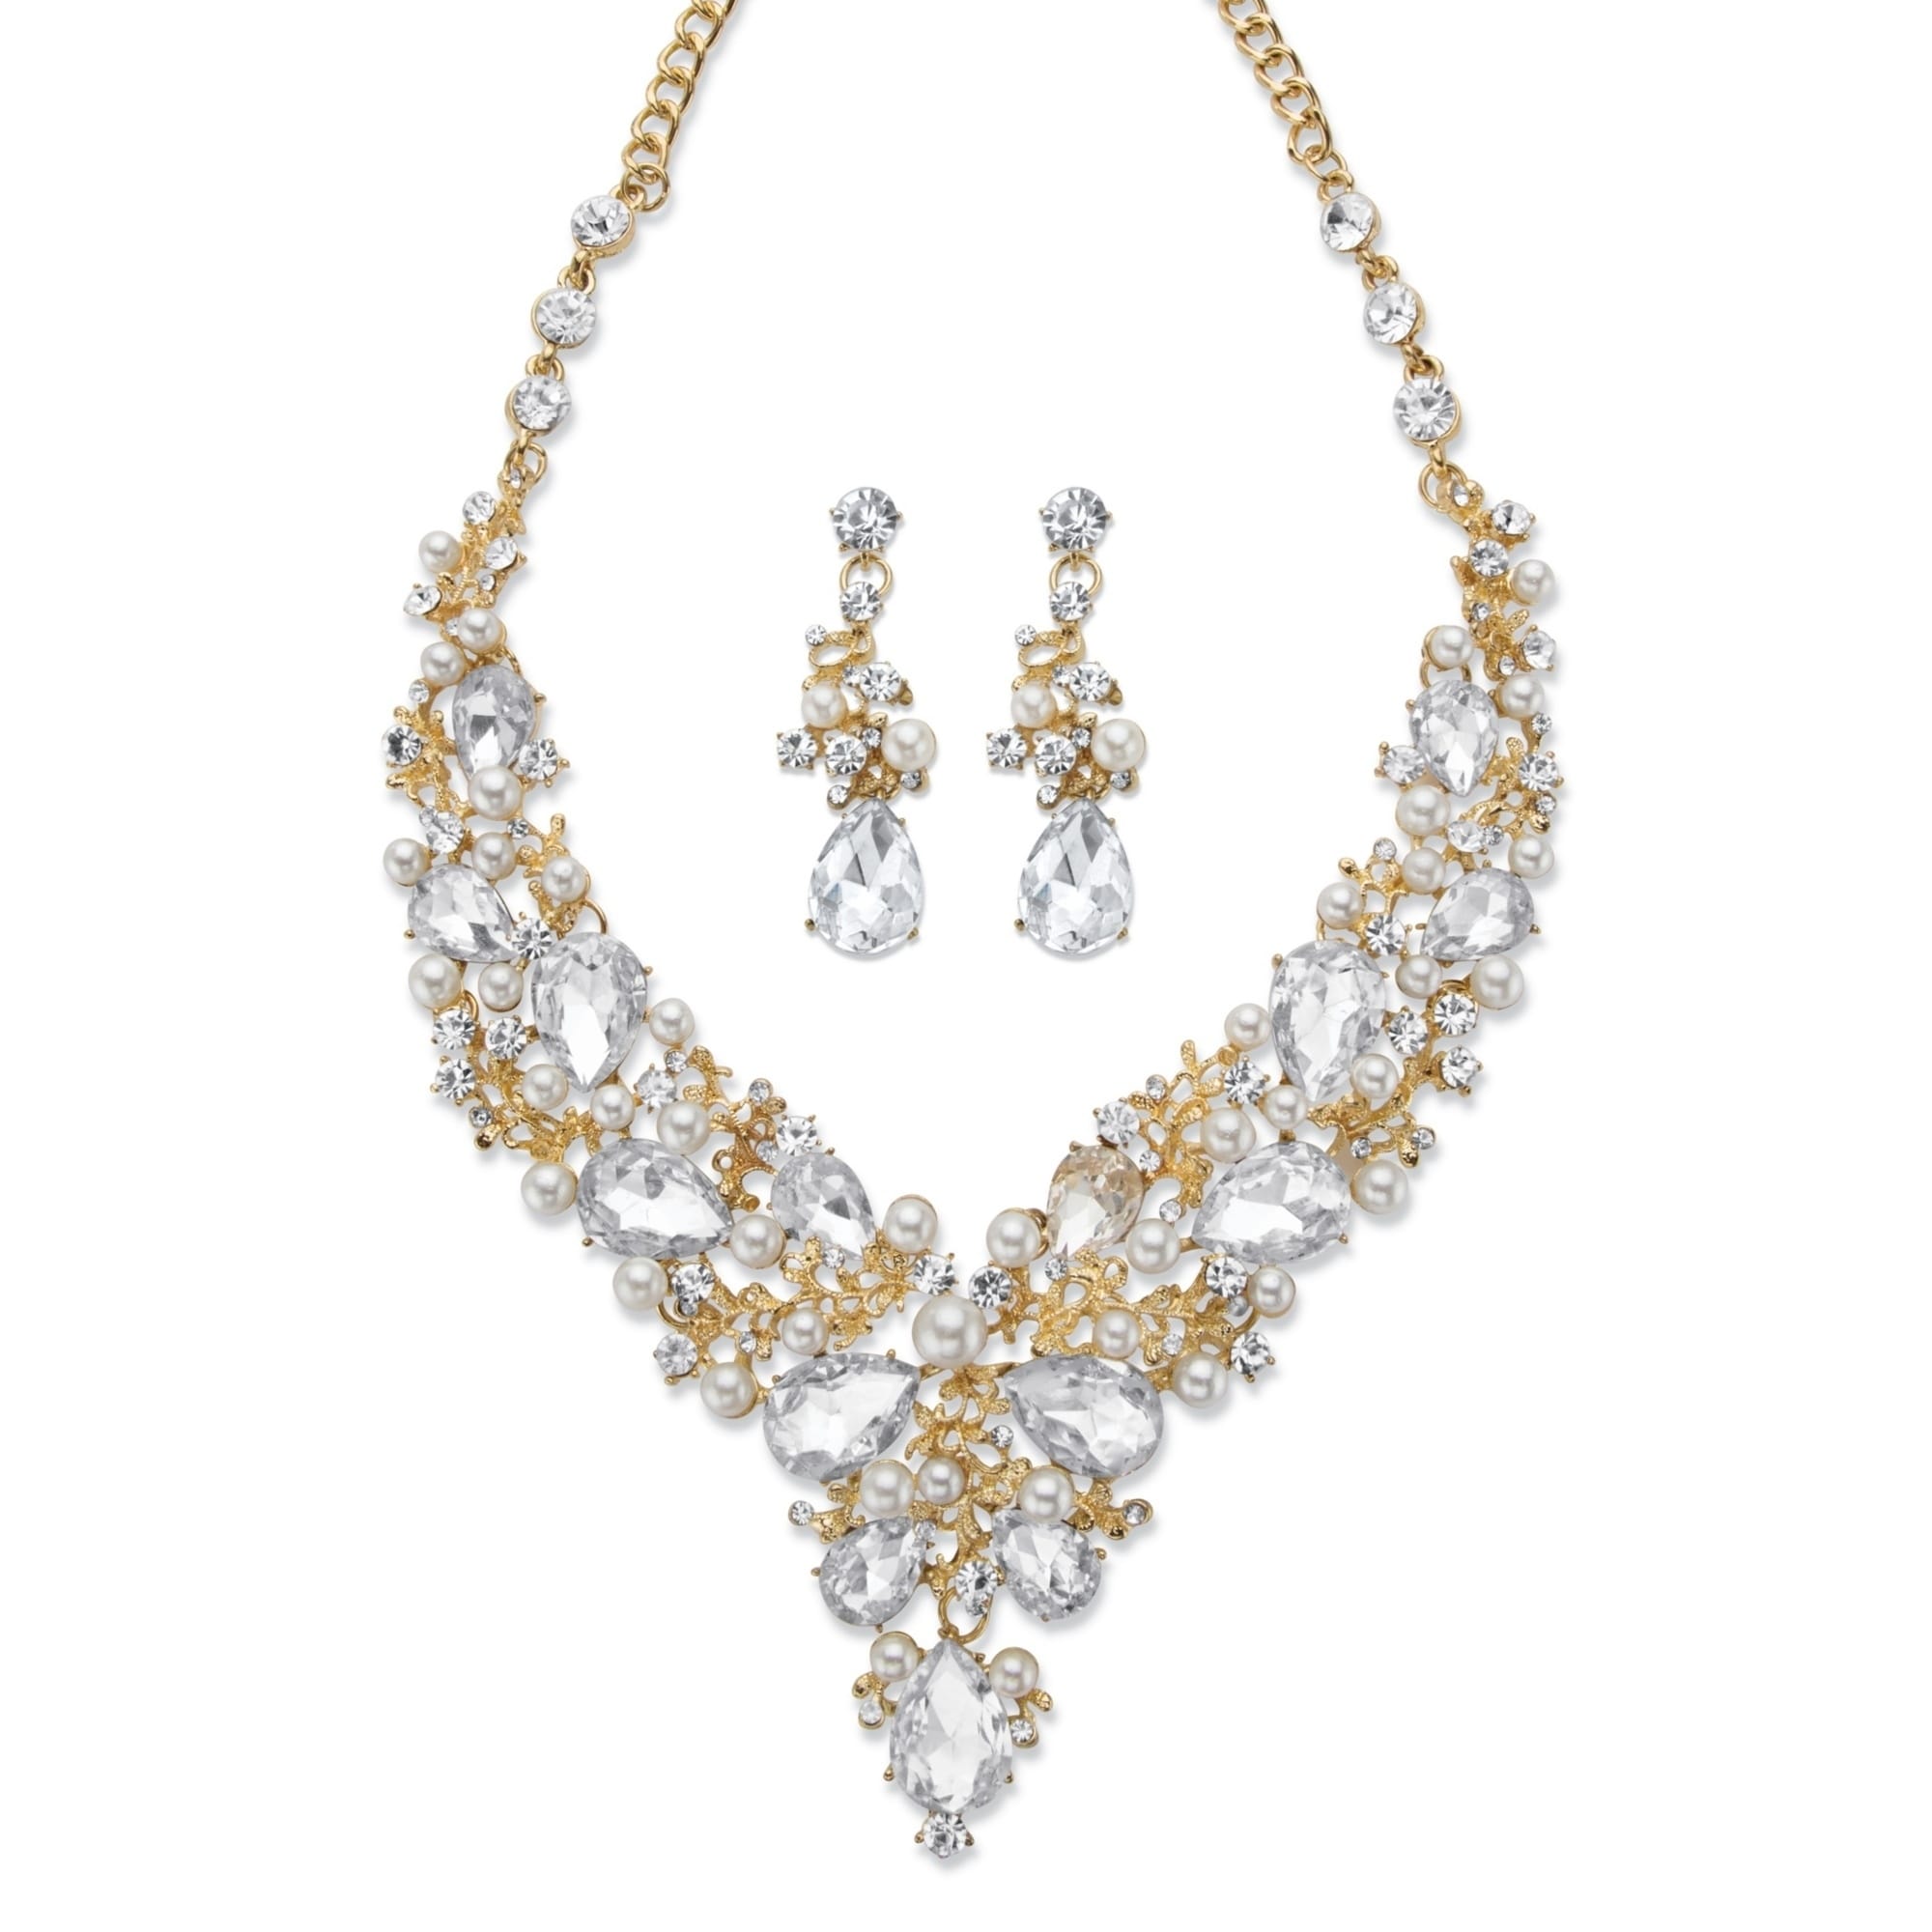 Shop Gold Tone Bib Necklace and Earring 